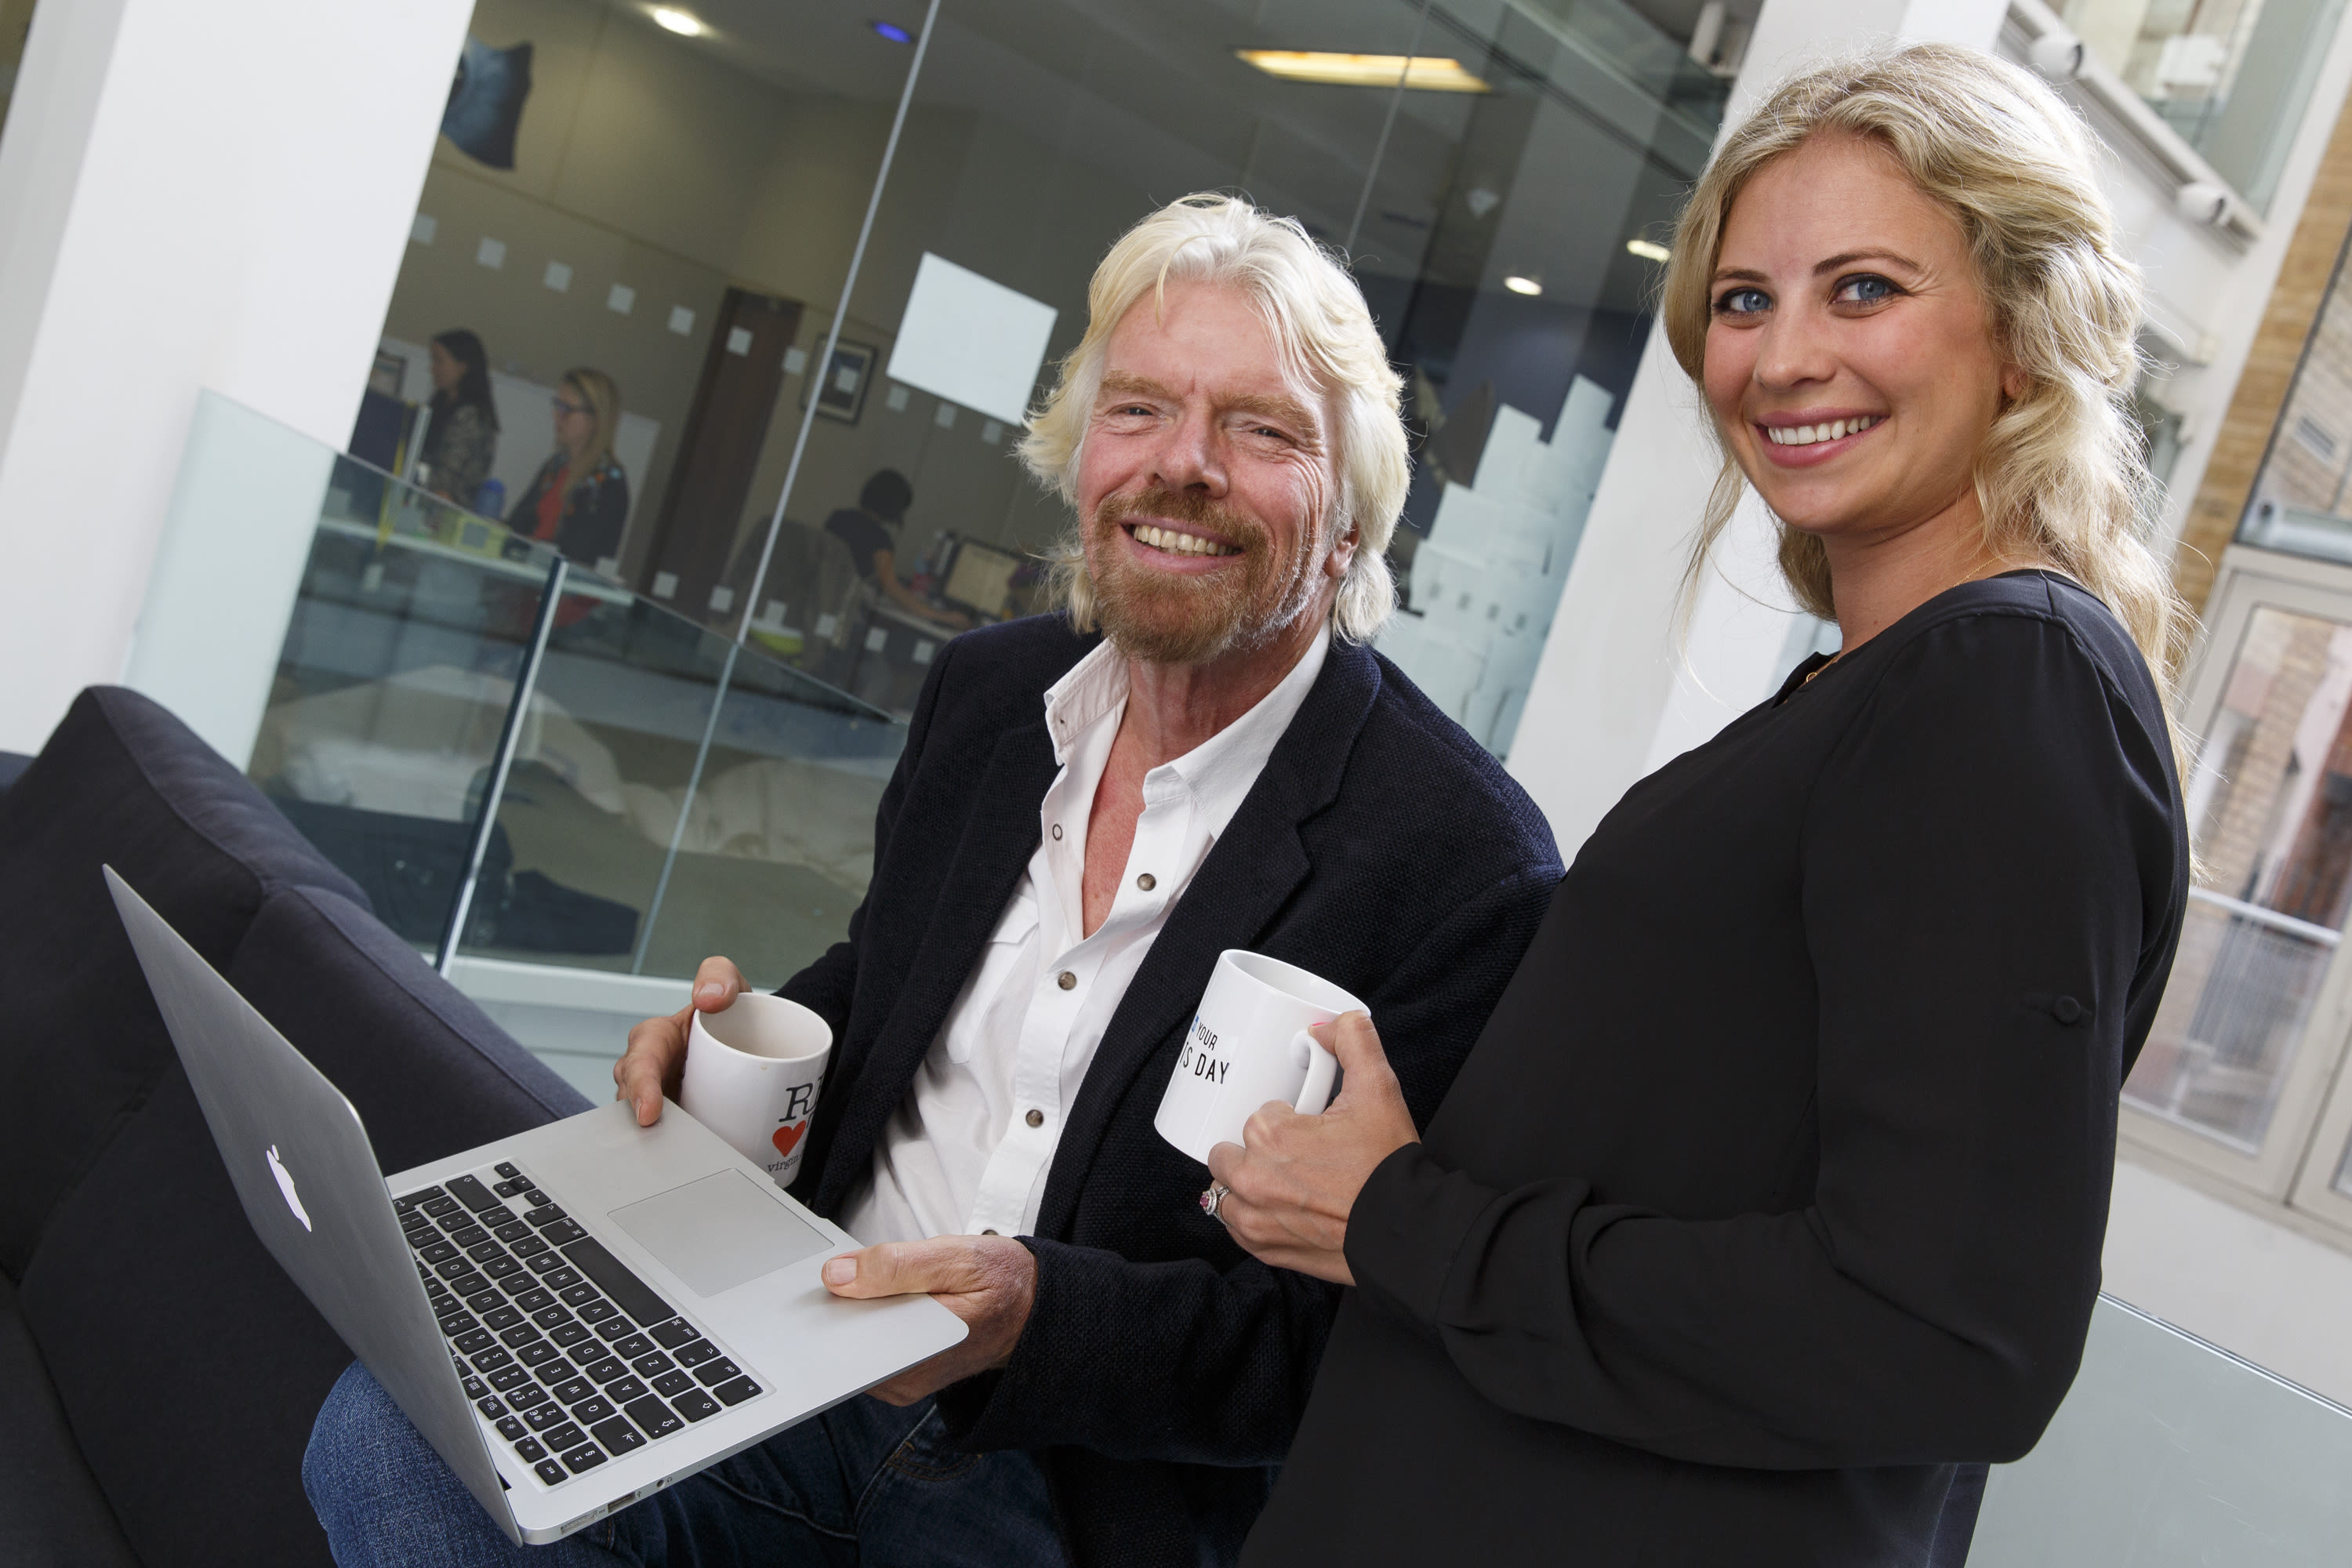 Richard Branson and Holly Branson smiling in an office and holding a mug and laptop